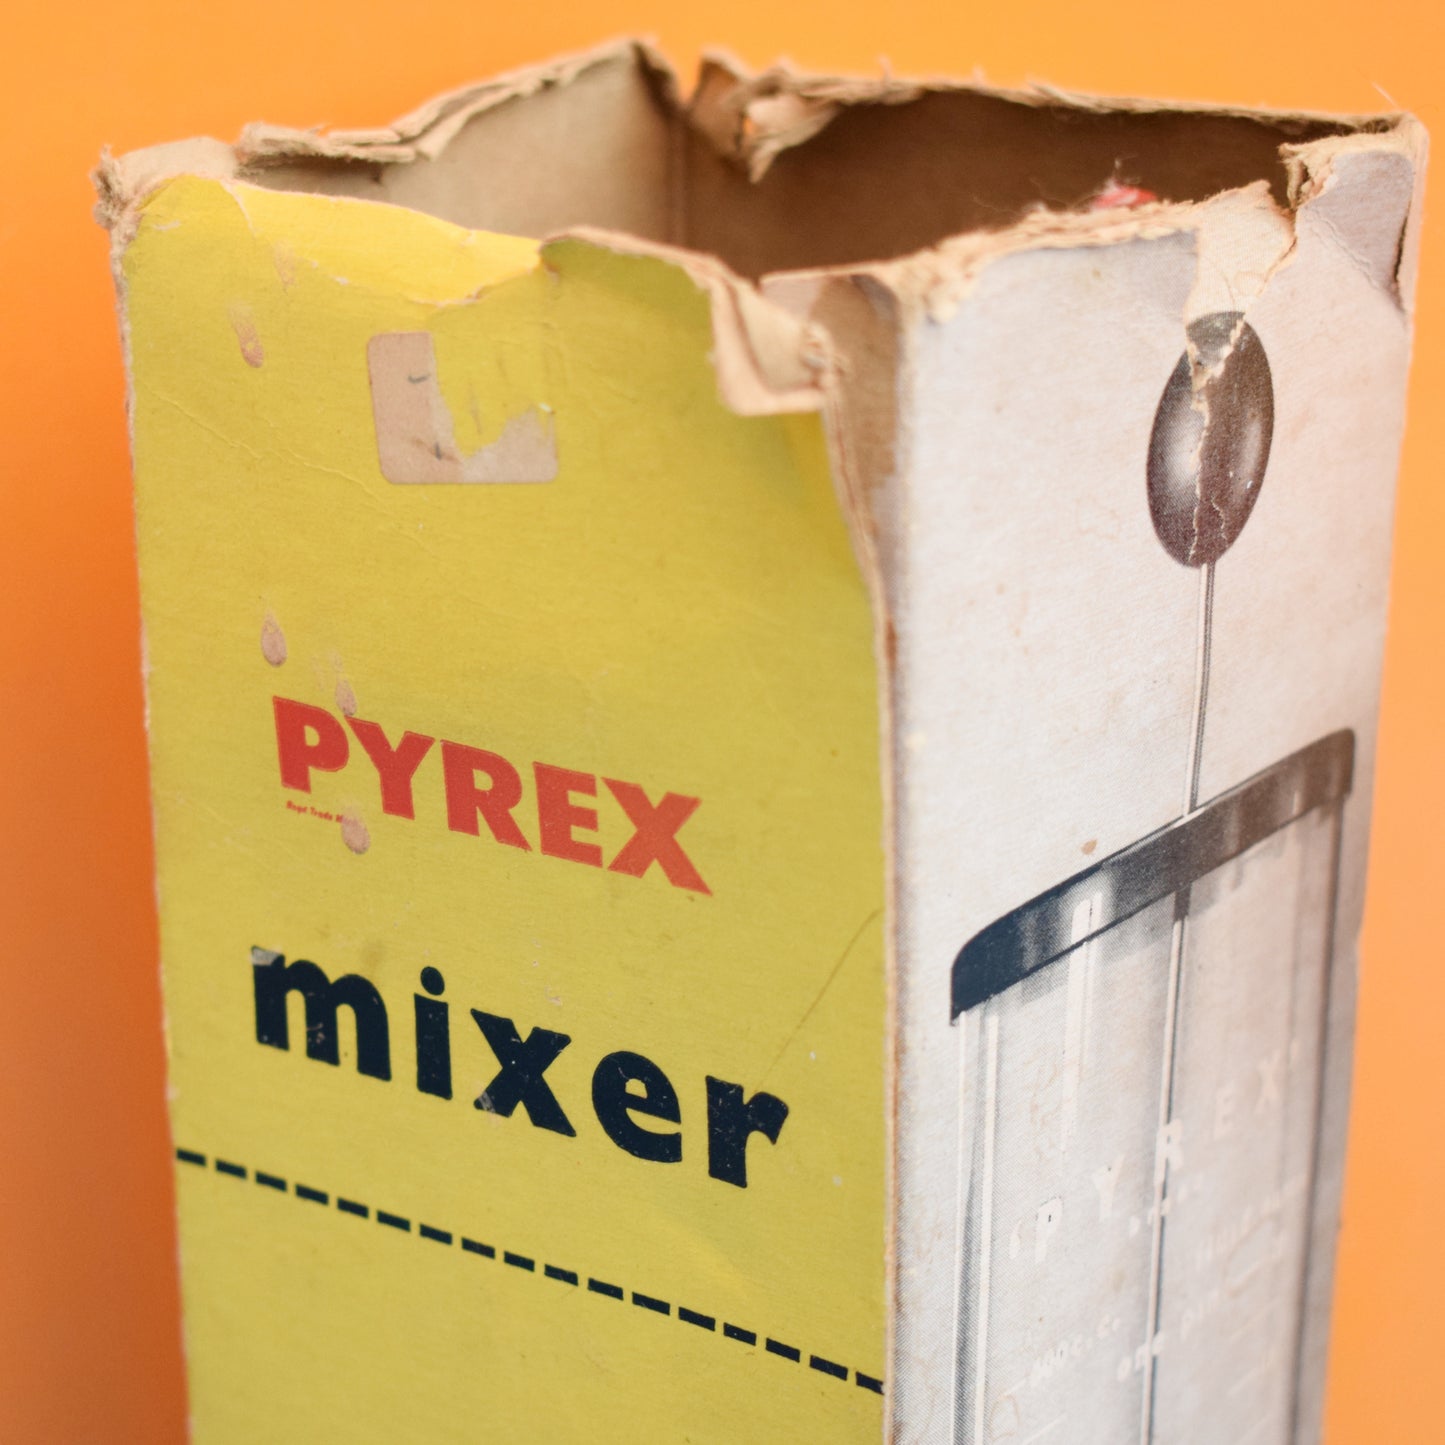 Vintage 1950s Atomic Style Pyrex Mixer / Milk Frother - Boxed